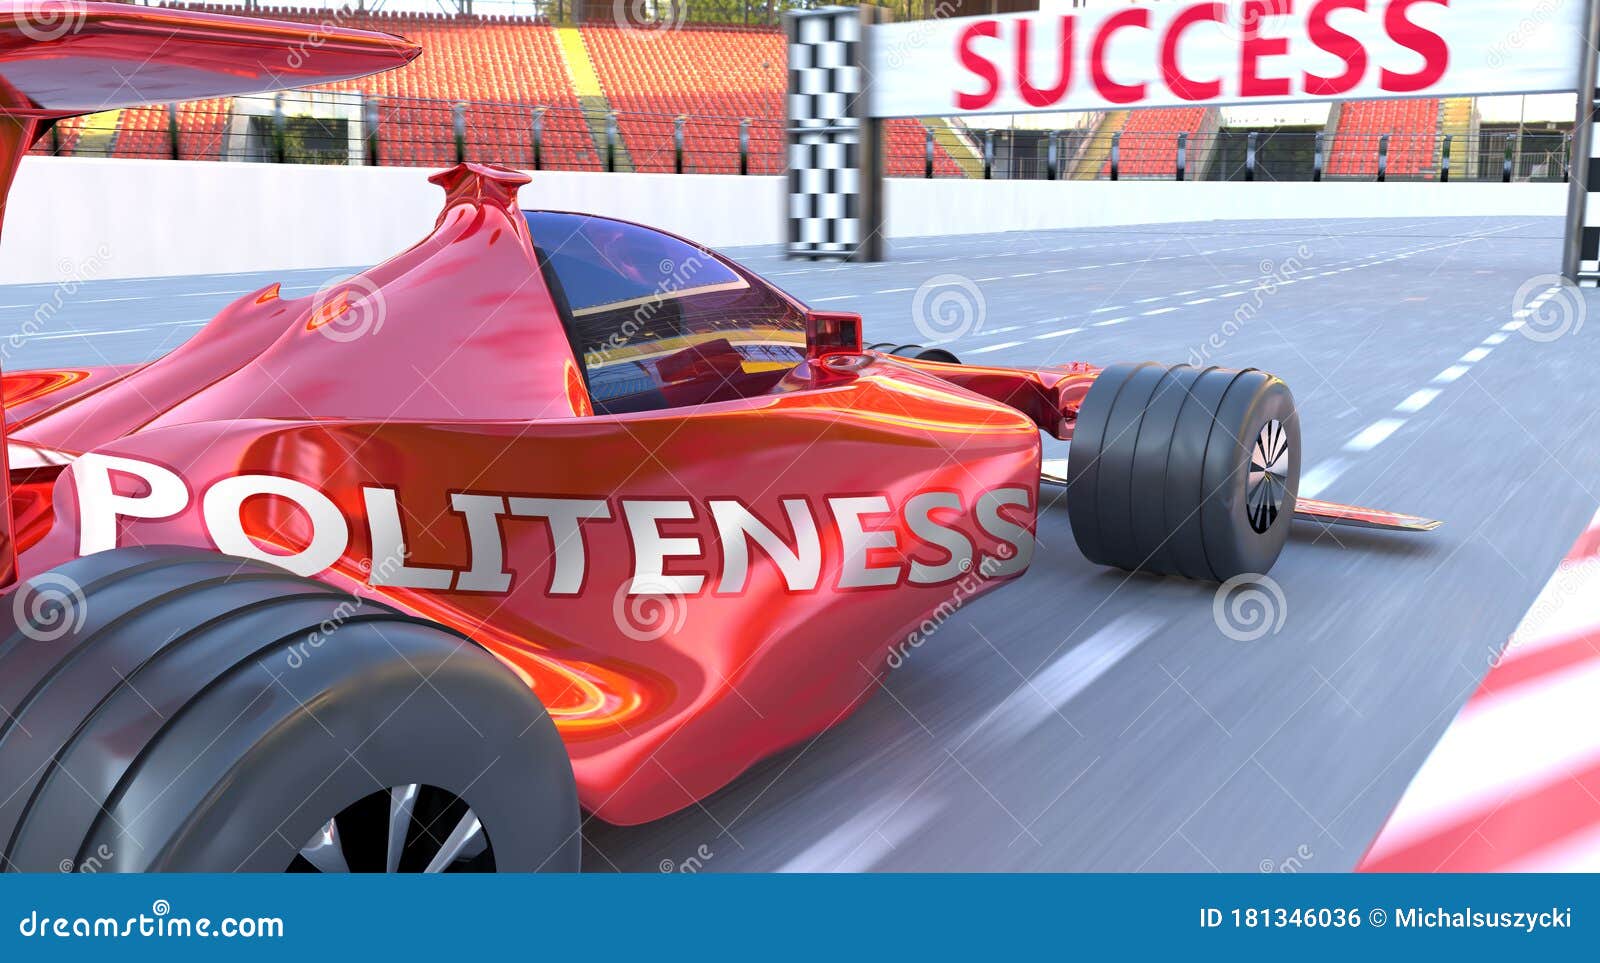 politeness and success - pictured as word politeness and a f1 car, to ize that politeness can help achieving success and